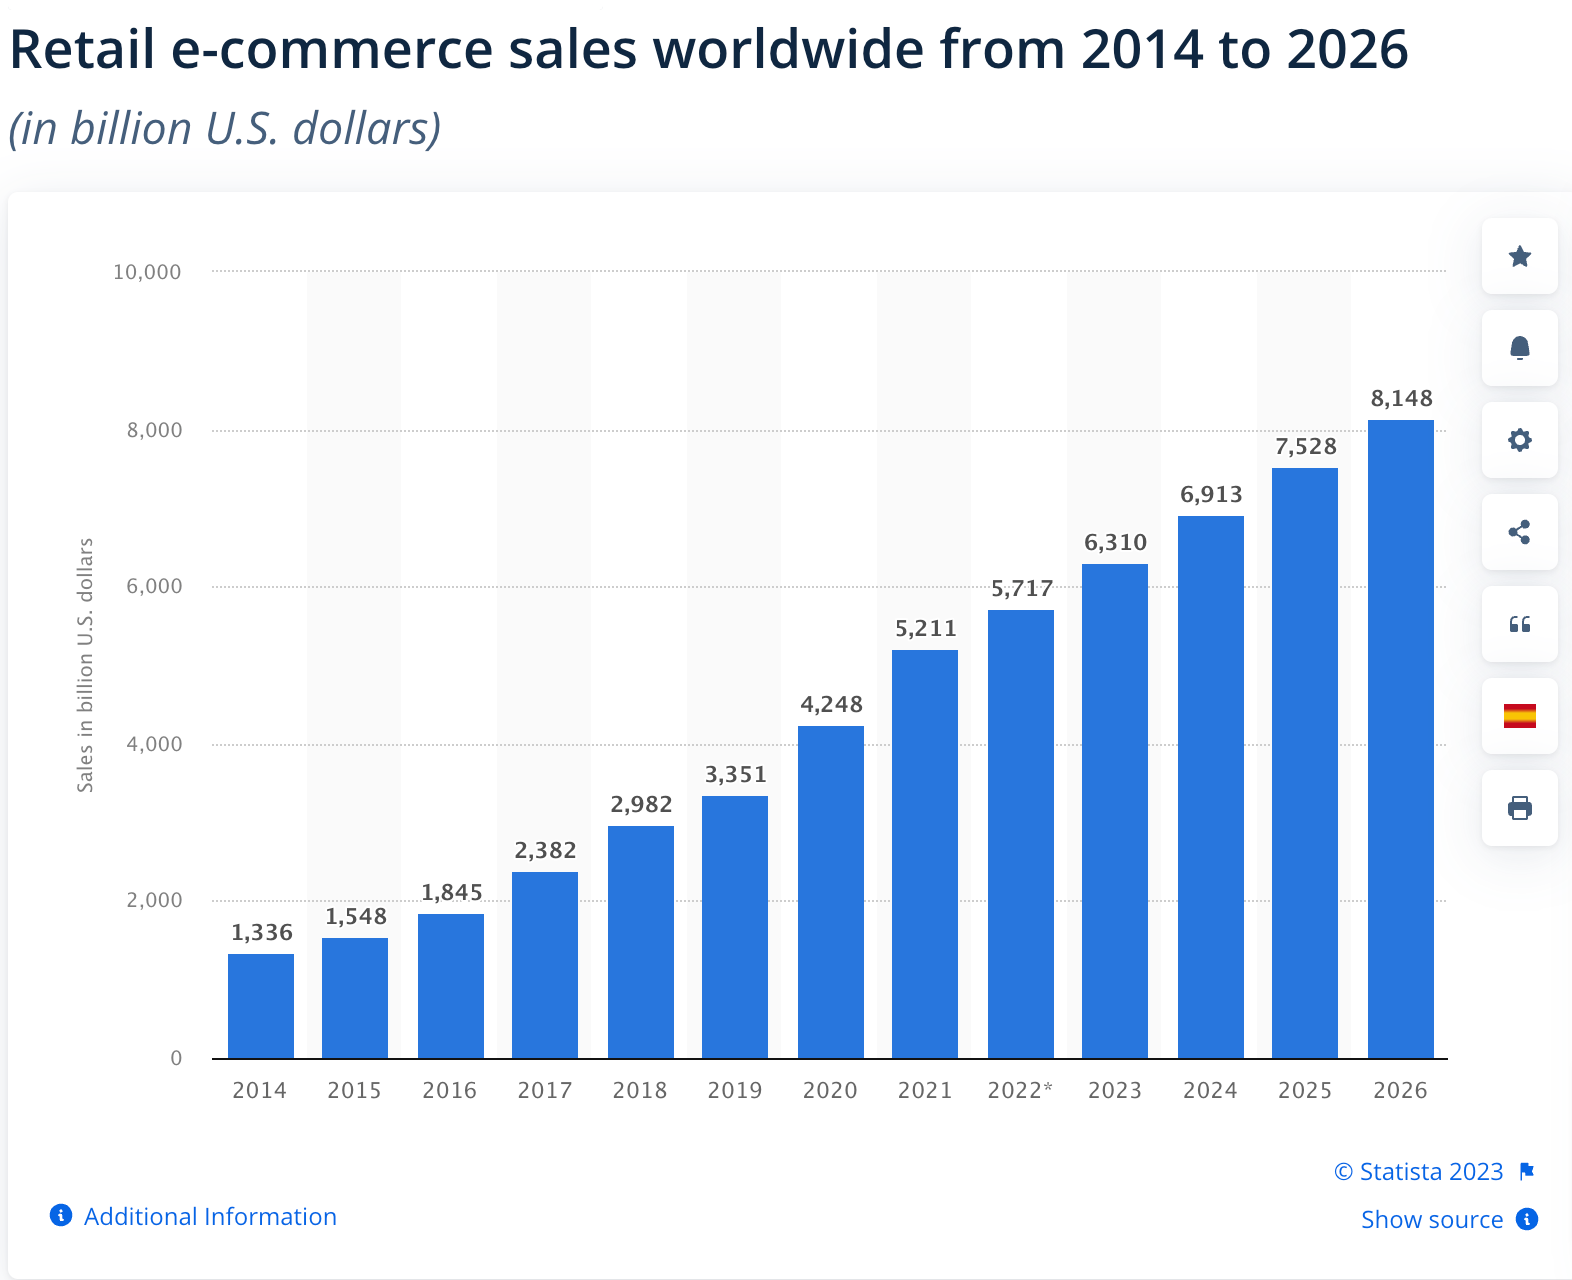 Retail ecommerce sales worldwide from 2014 to 2026